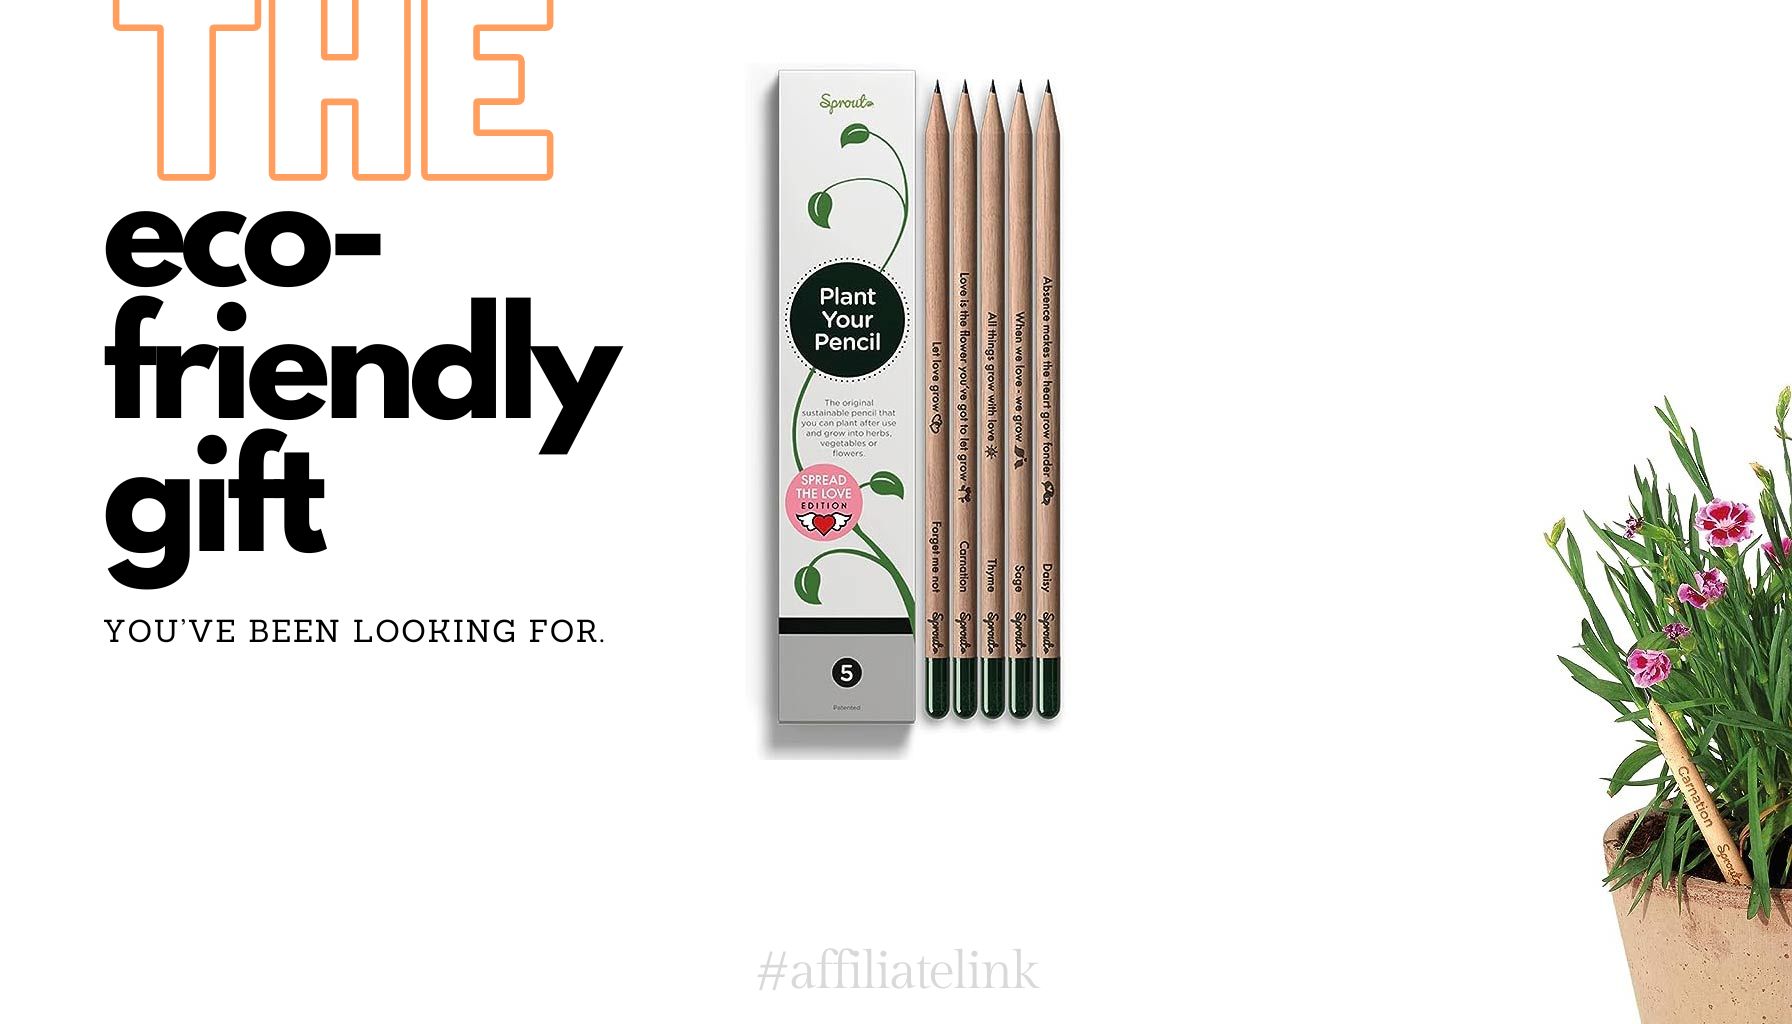 The eco-friendly gift you've been looking for: plant your pencil